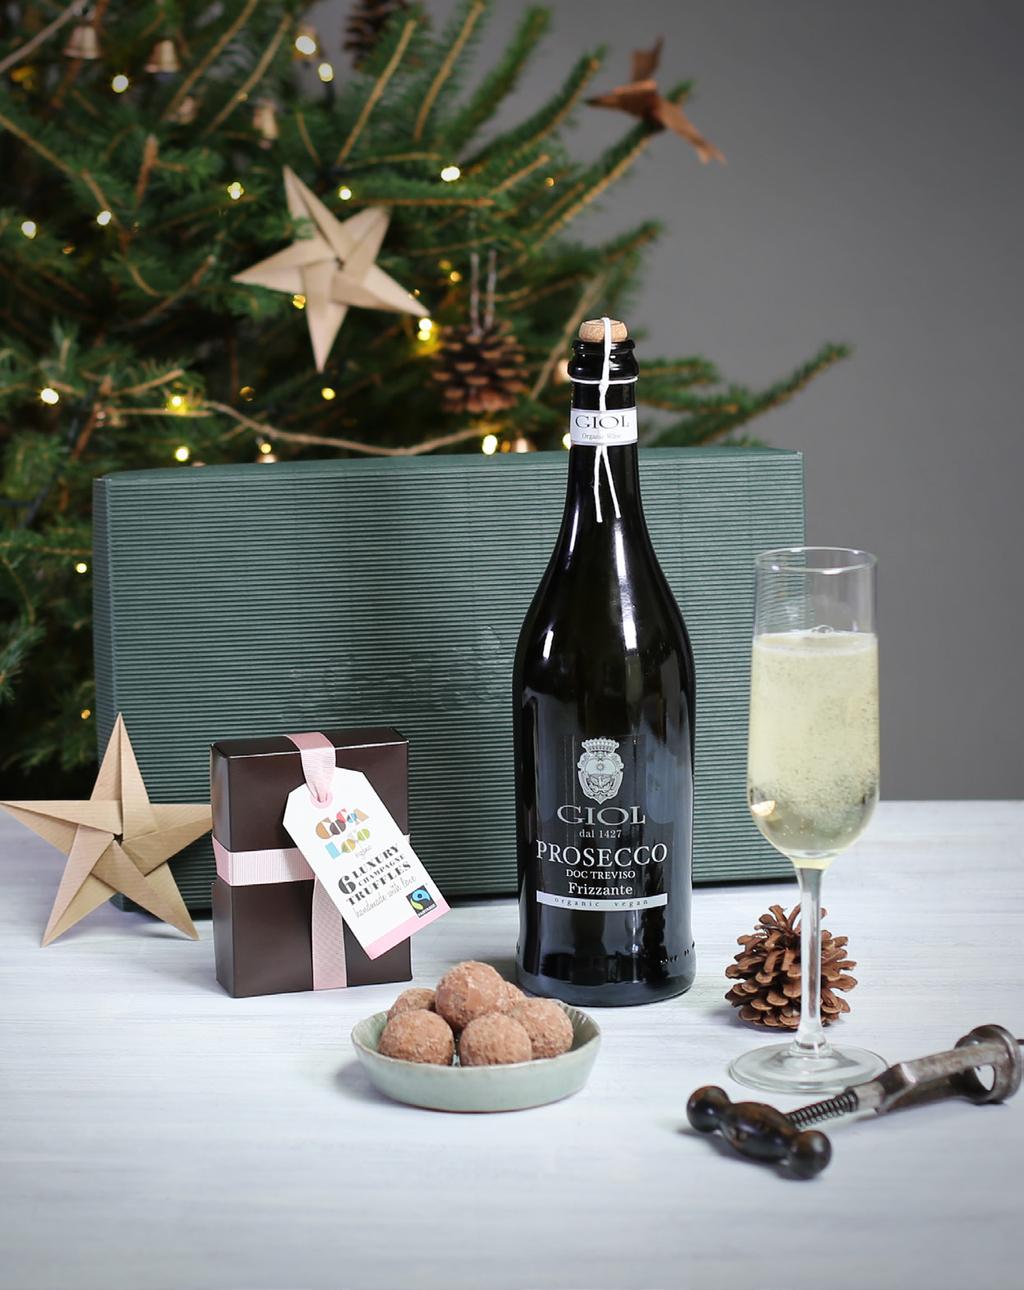 Prosecco & Truffle Gift Box (XHP29) A delicate Prosecco that s wonderfully fruity, with